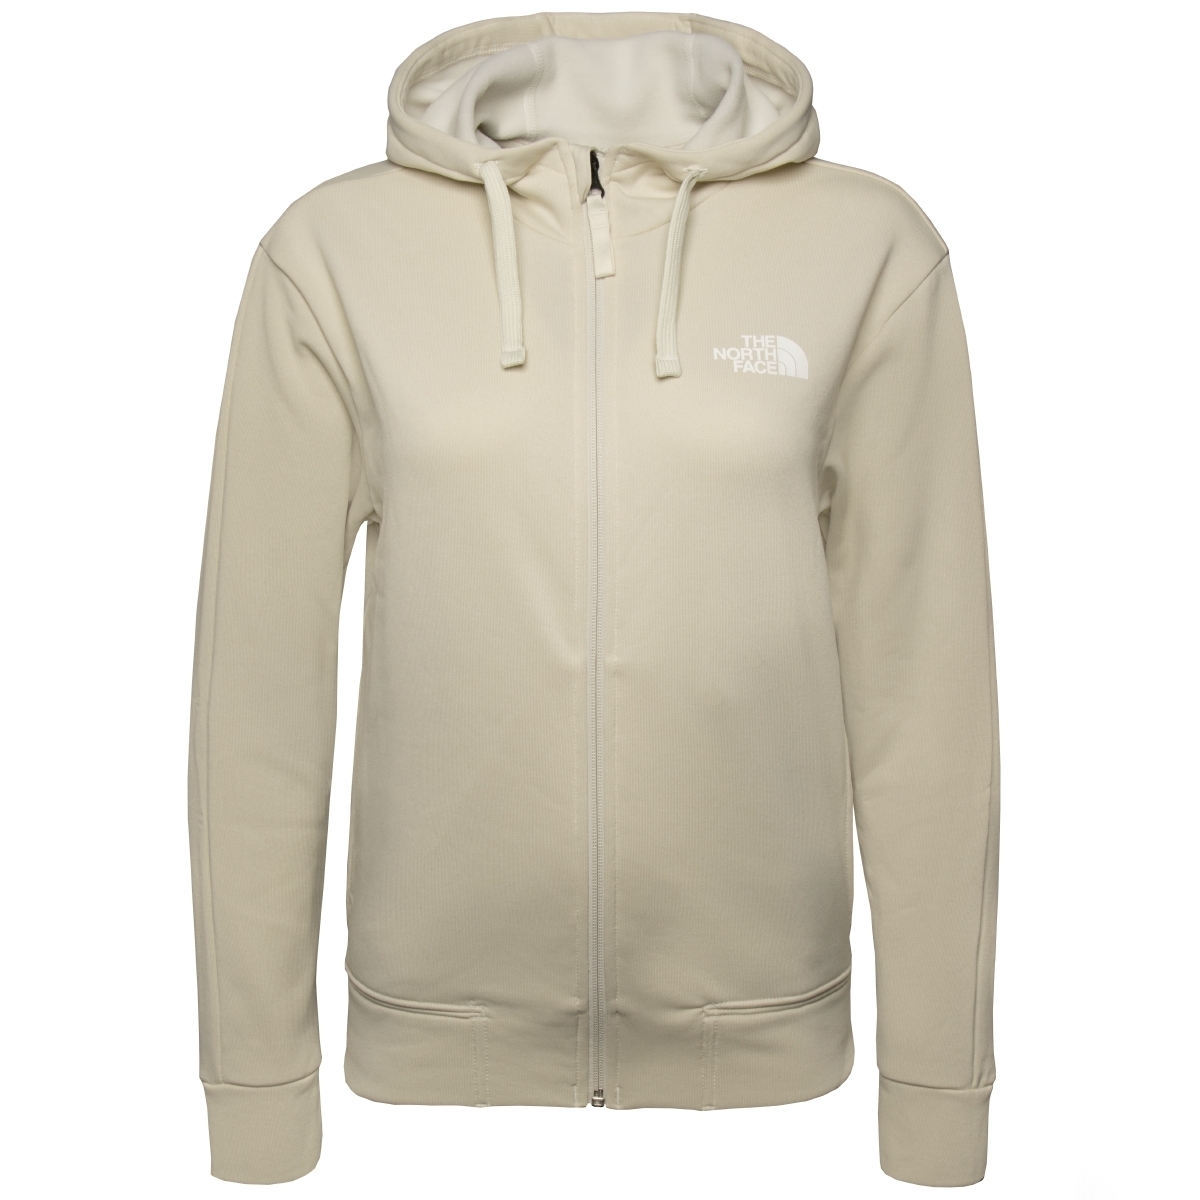 The North Face Exploration Full Zip Sweatjacke beige